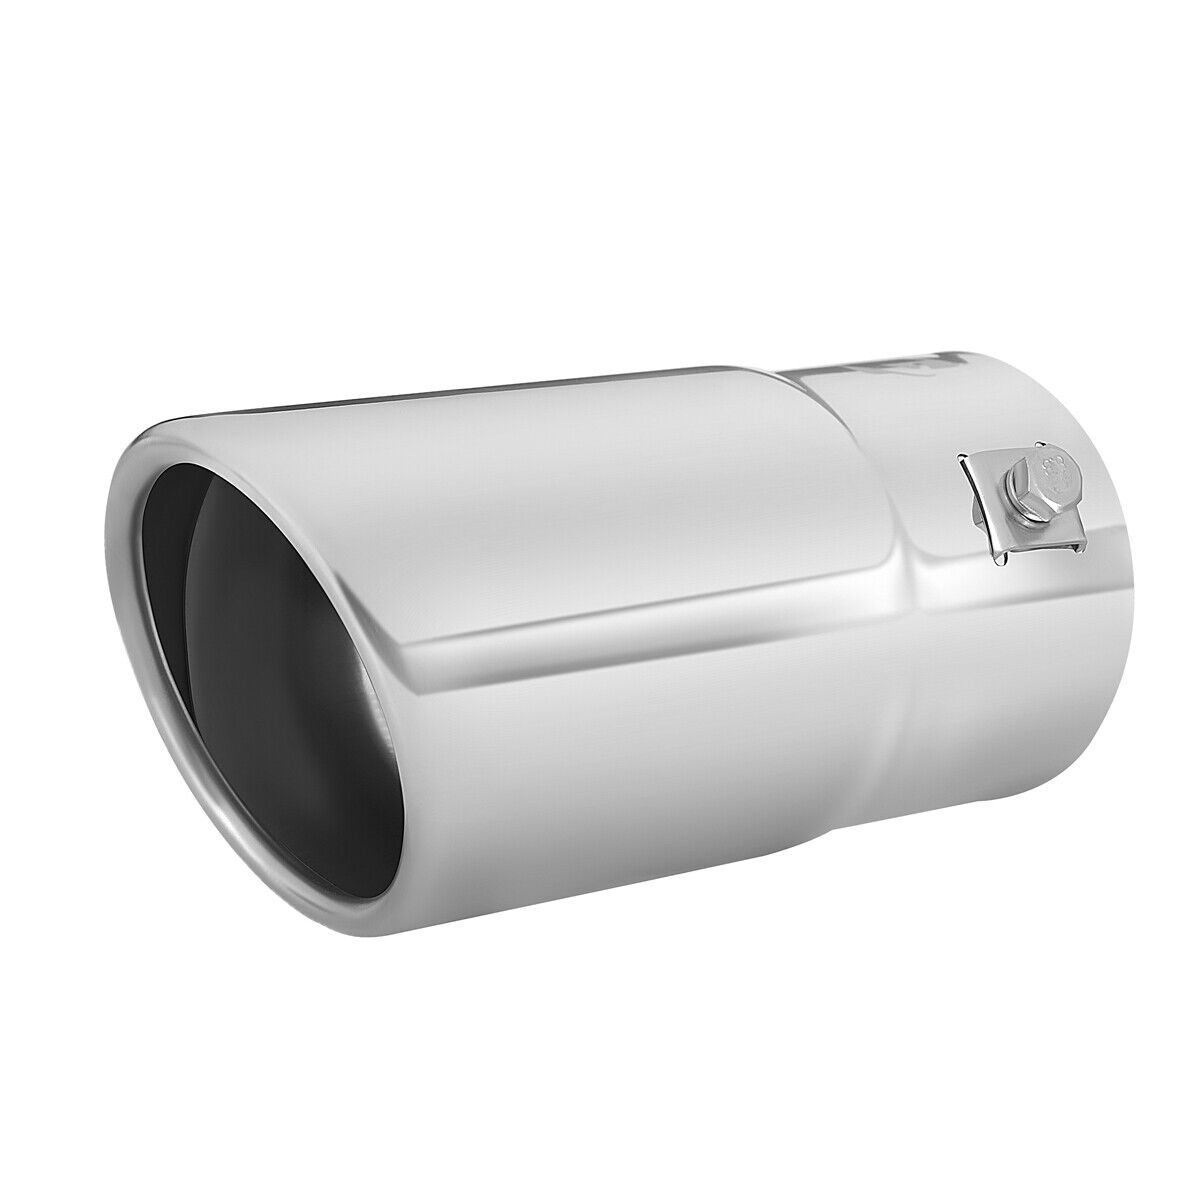 Car Muffler Tip Exhaust Pipe, Stainless Steel Chrome Effect, Fit 1.75-2.5 inch ⌀